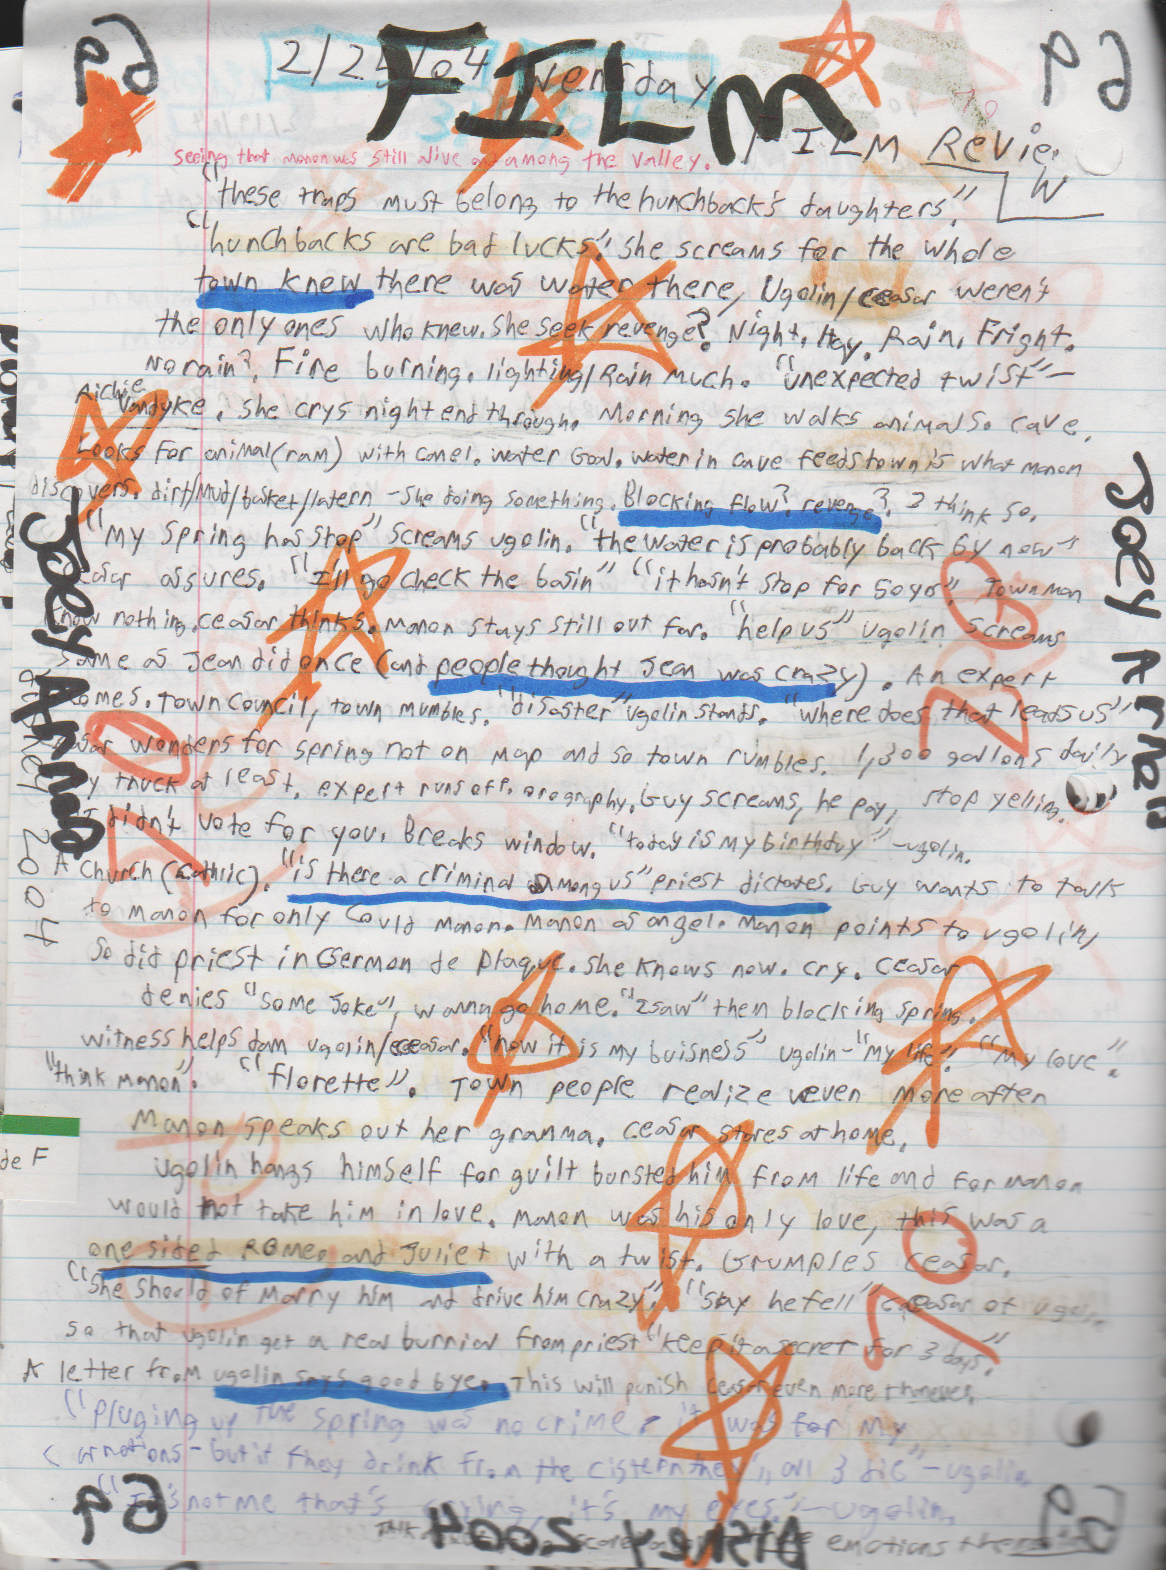 2004-01-29 - Thursday - Carpetball FGHS Senior Project Journal, Joey Arnold, Part 02, 96pages numbered, Notebook-68.png